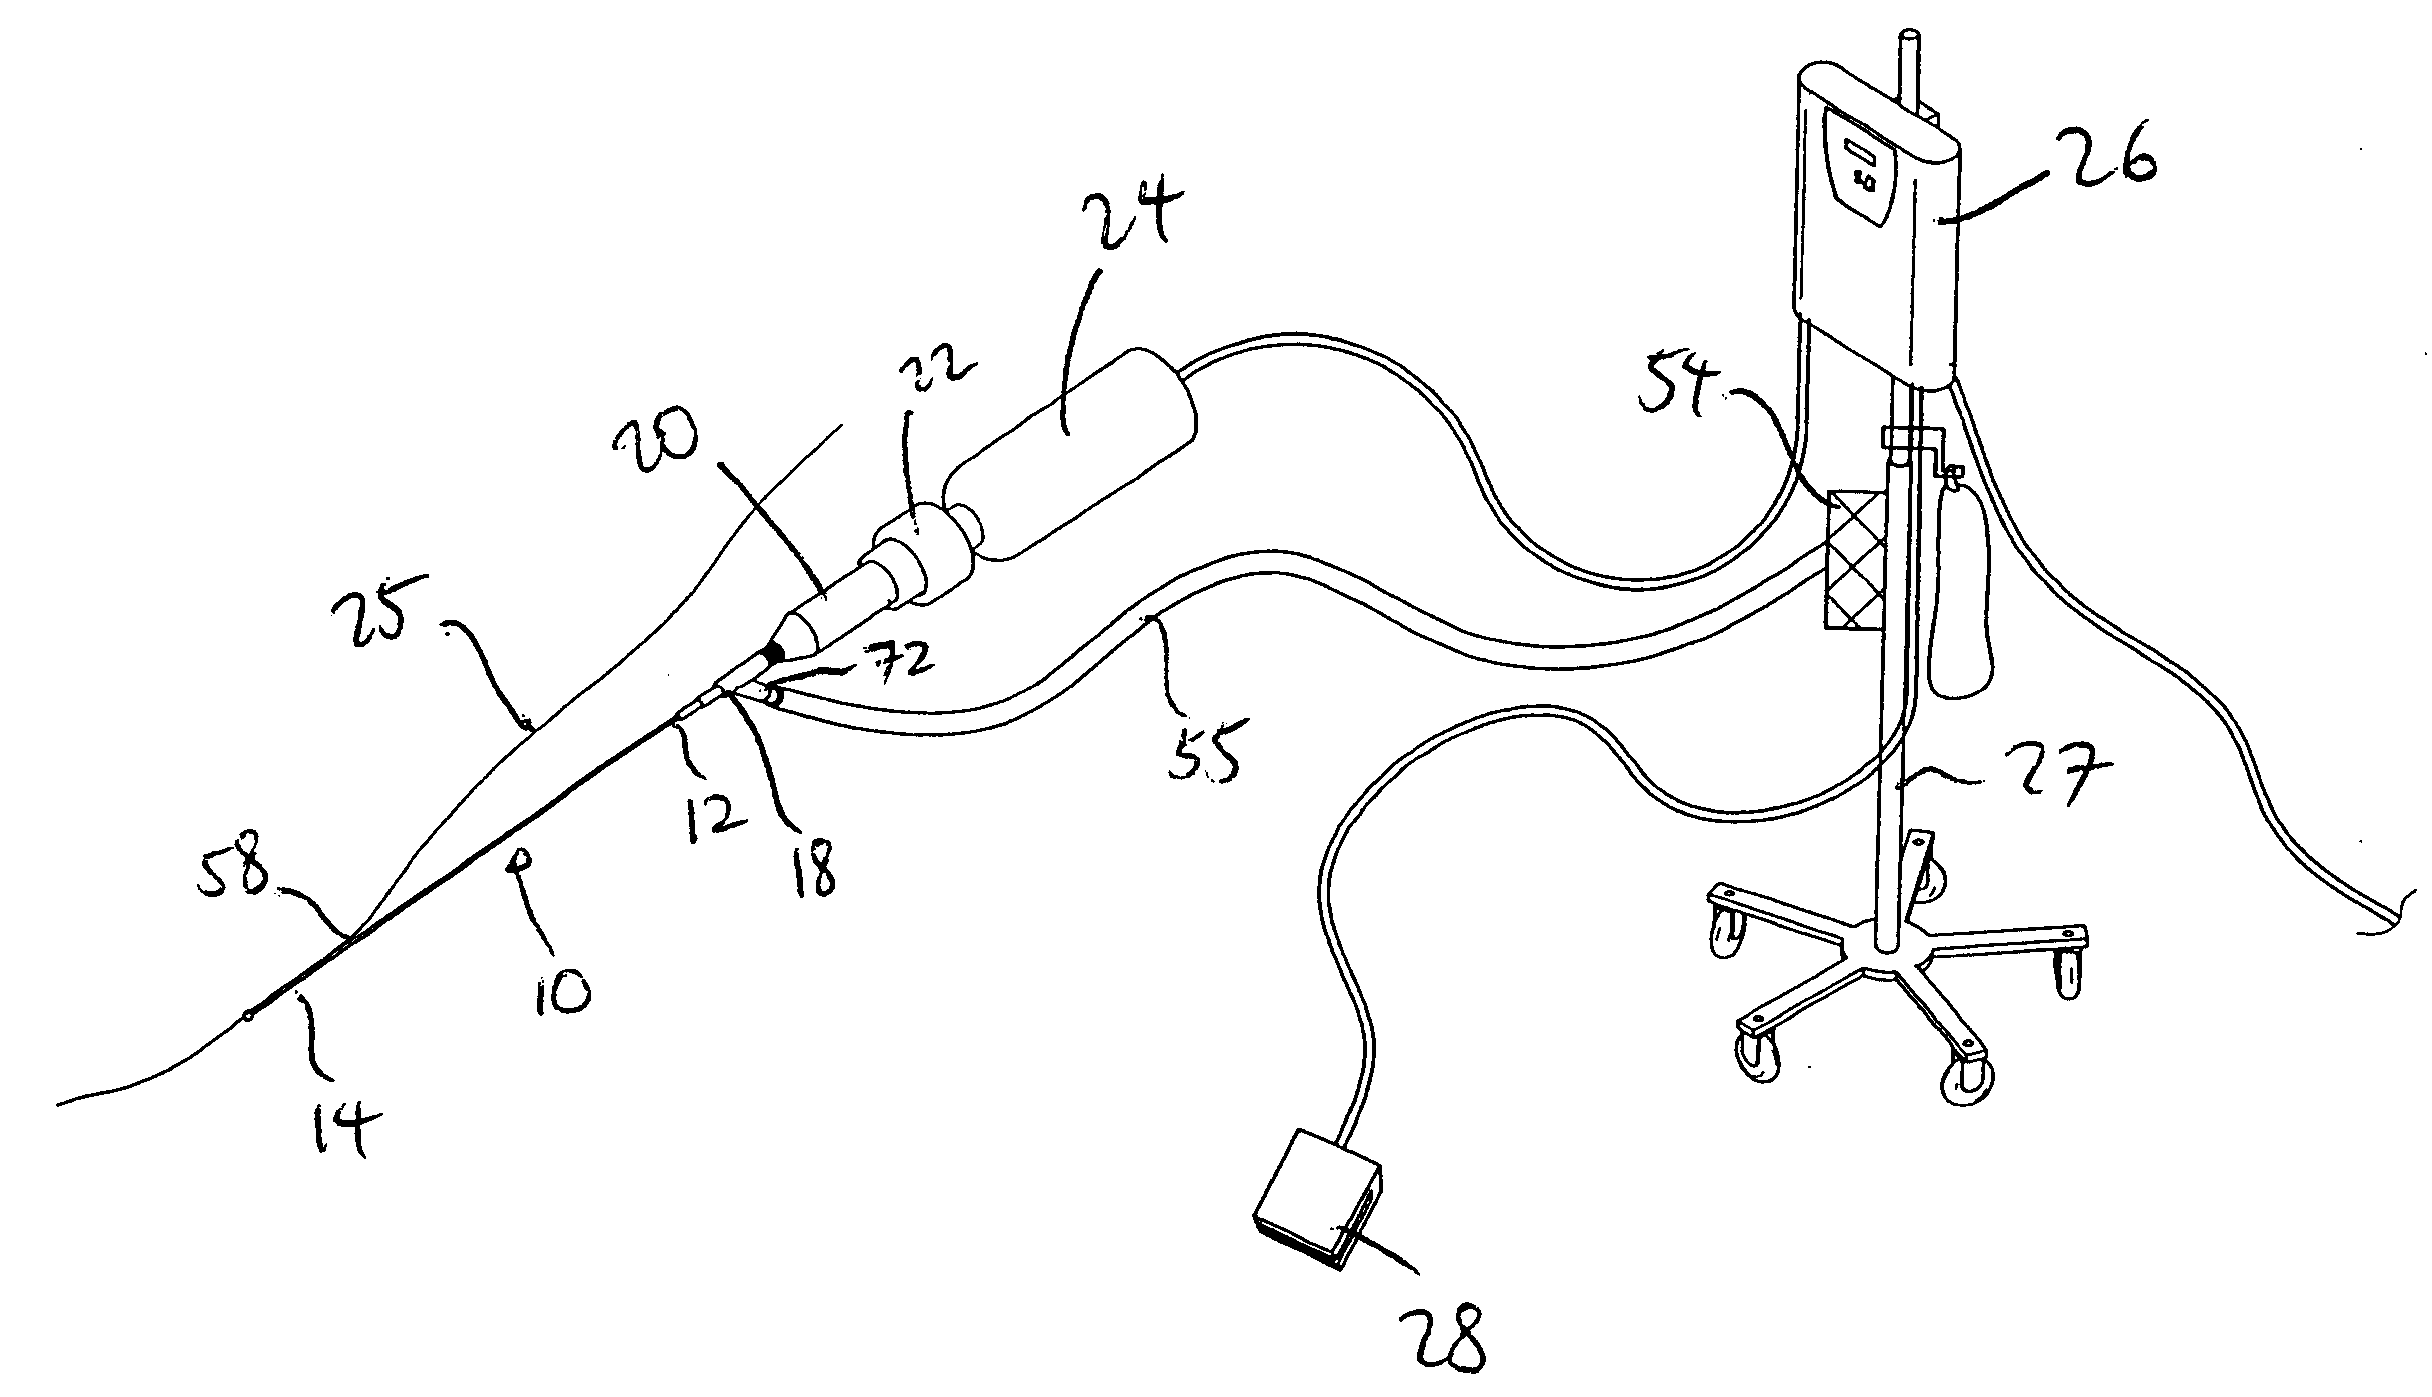 Ultrasound catheter having protective feature against breakage